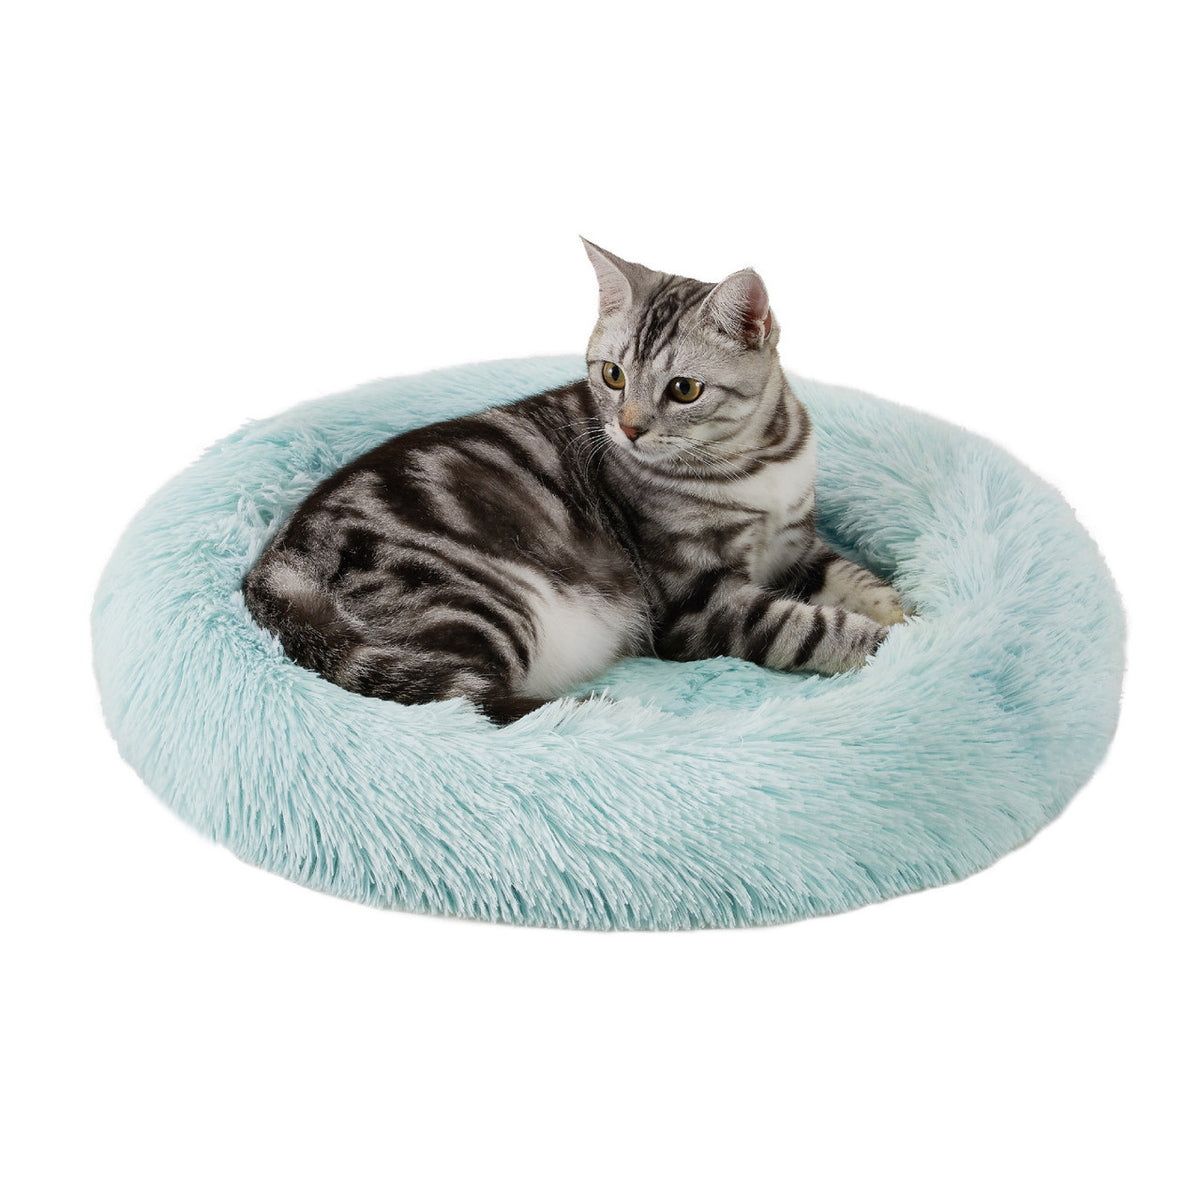 Outward Hound - Calming Oval Cat Bed Pad 21"x19"